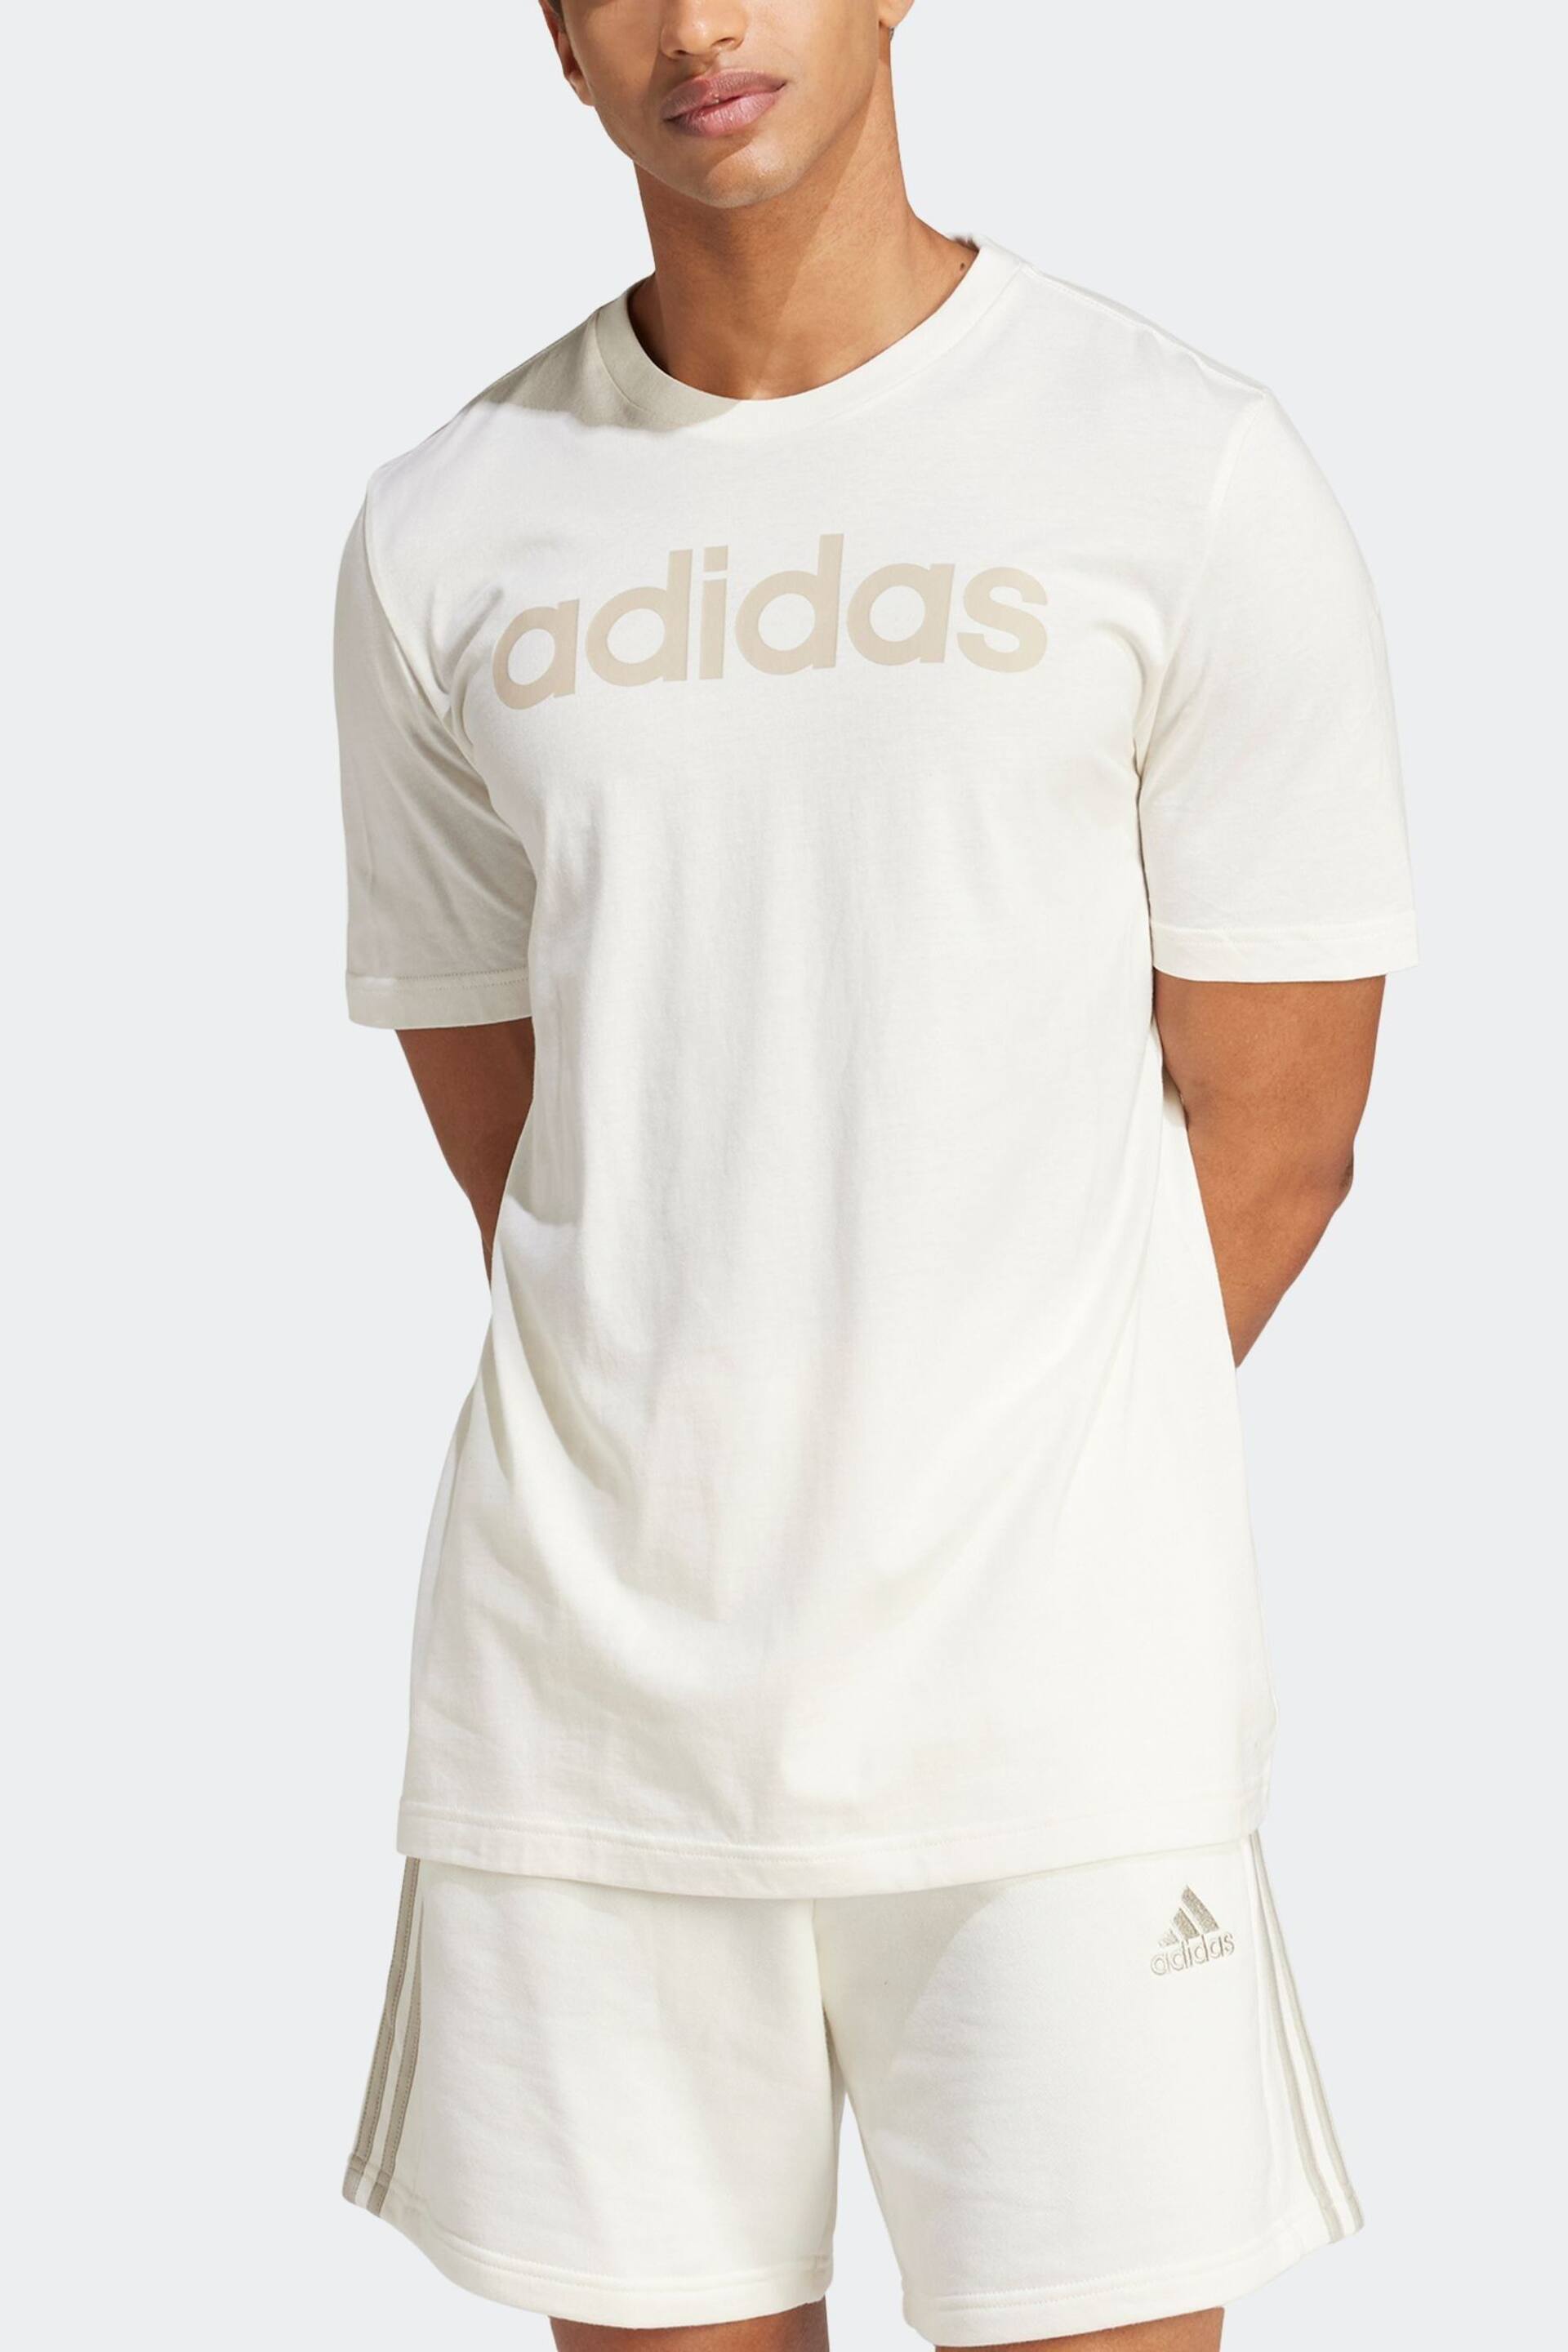 adidas White Sportswear Essentials Single Jersey Linear Embroidered Logo T-Shirt - Image 1 of 6